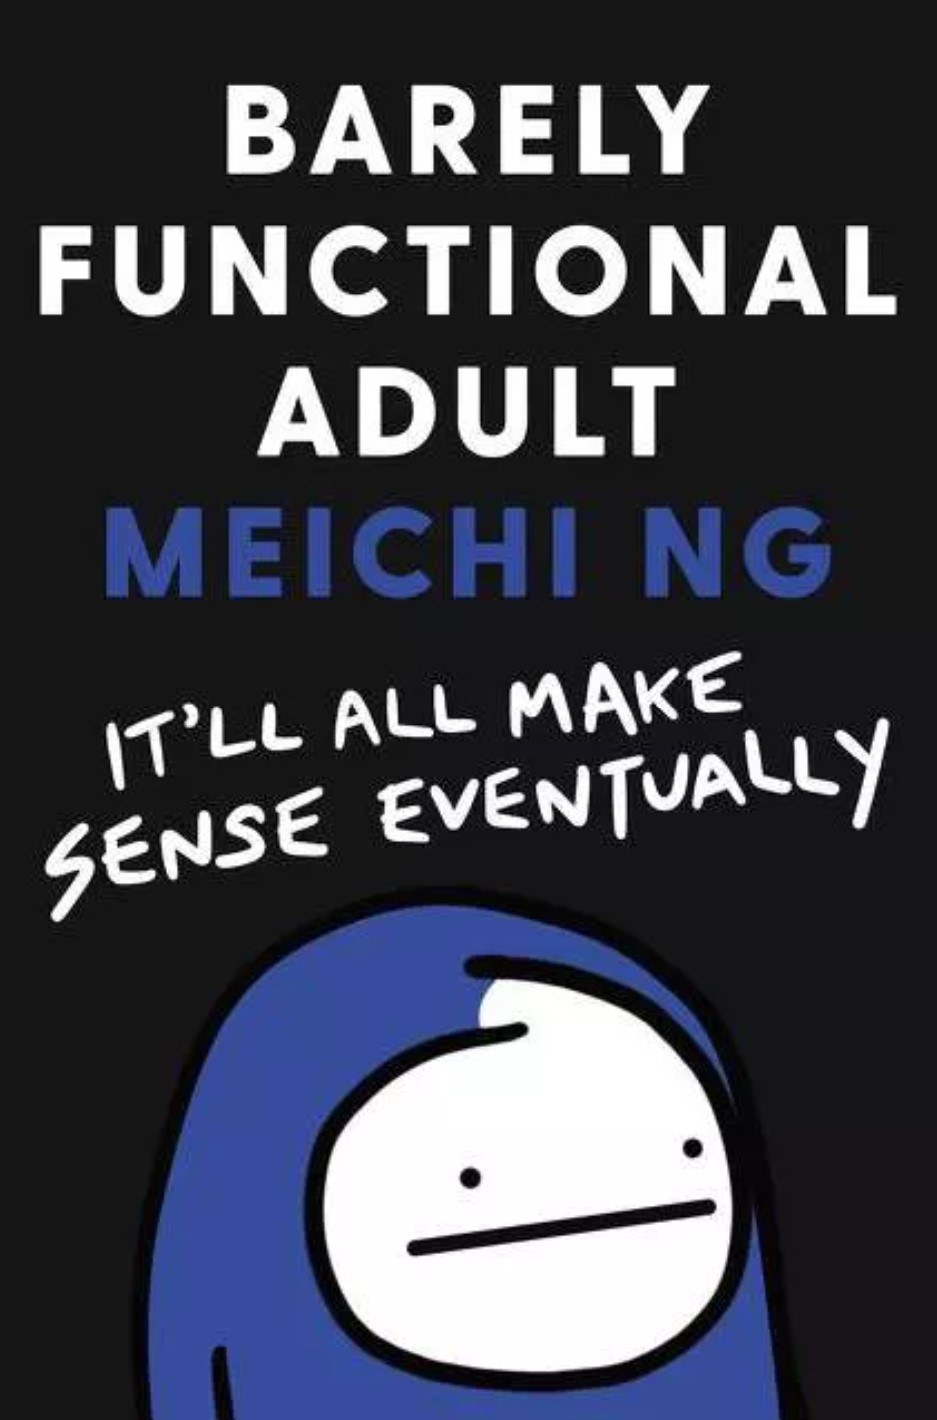 The cover of Barely Functional Adult by Meichi Ng